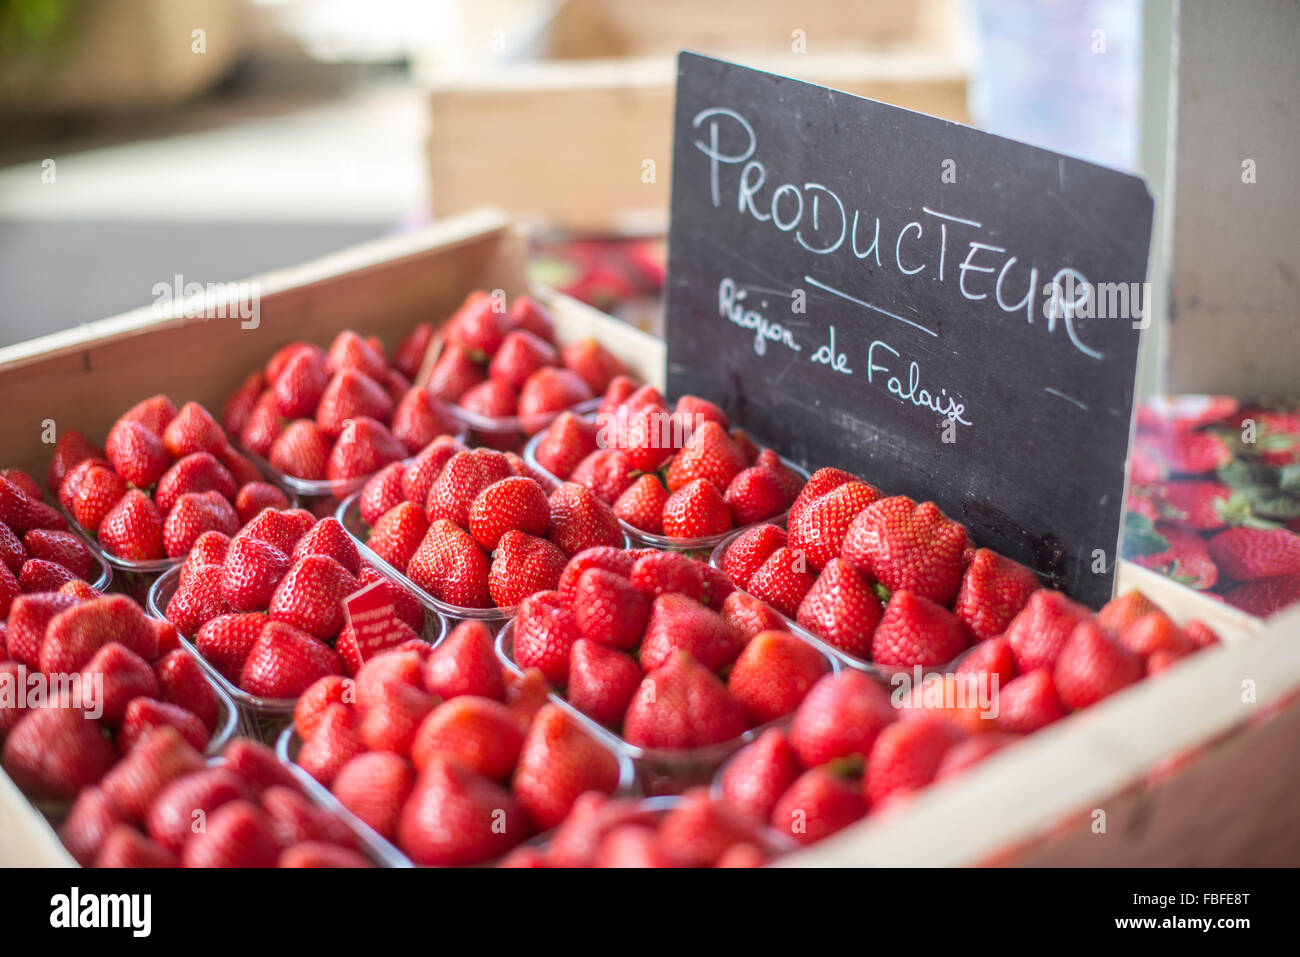 High Angle View Of Strawberries On Display At Store Stock Photo